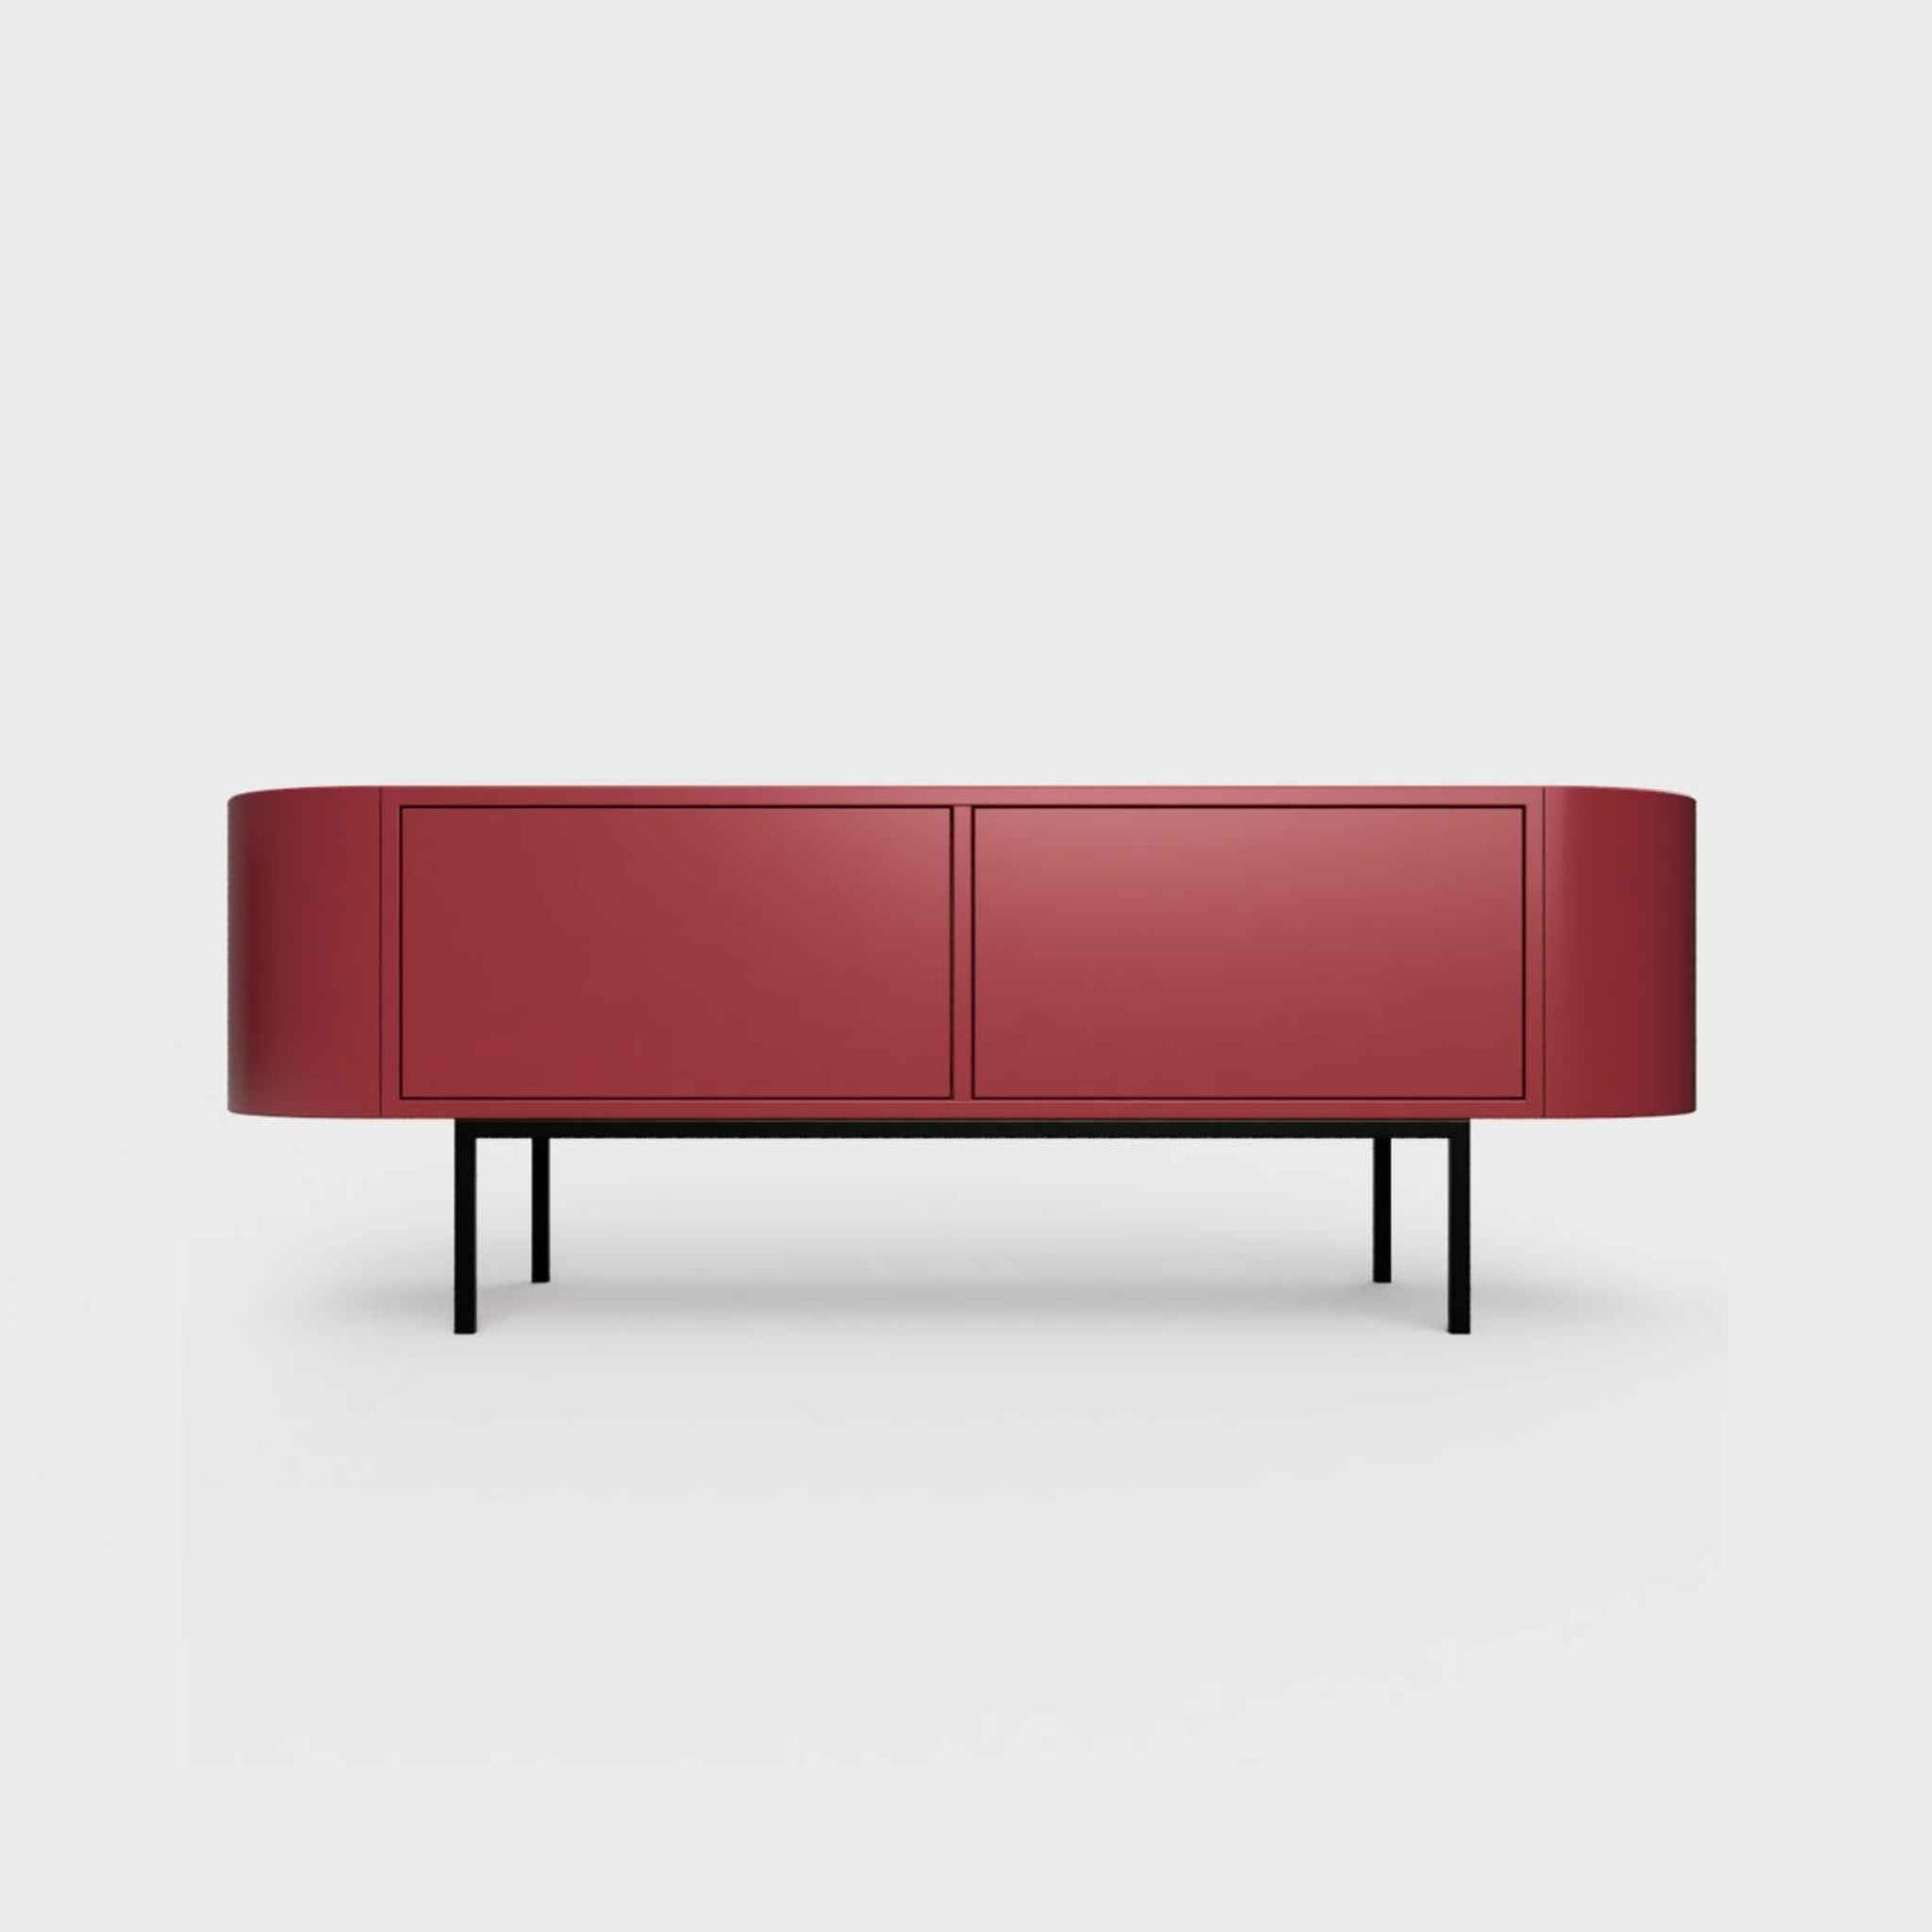 Curved Desiva Enna 01 lowboard in ruby red color steel, available in Switzerland via ÉTAUDORÉ